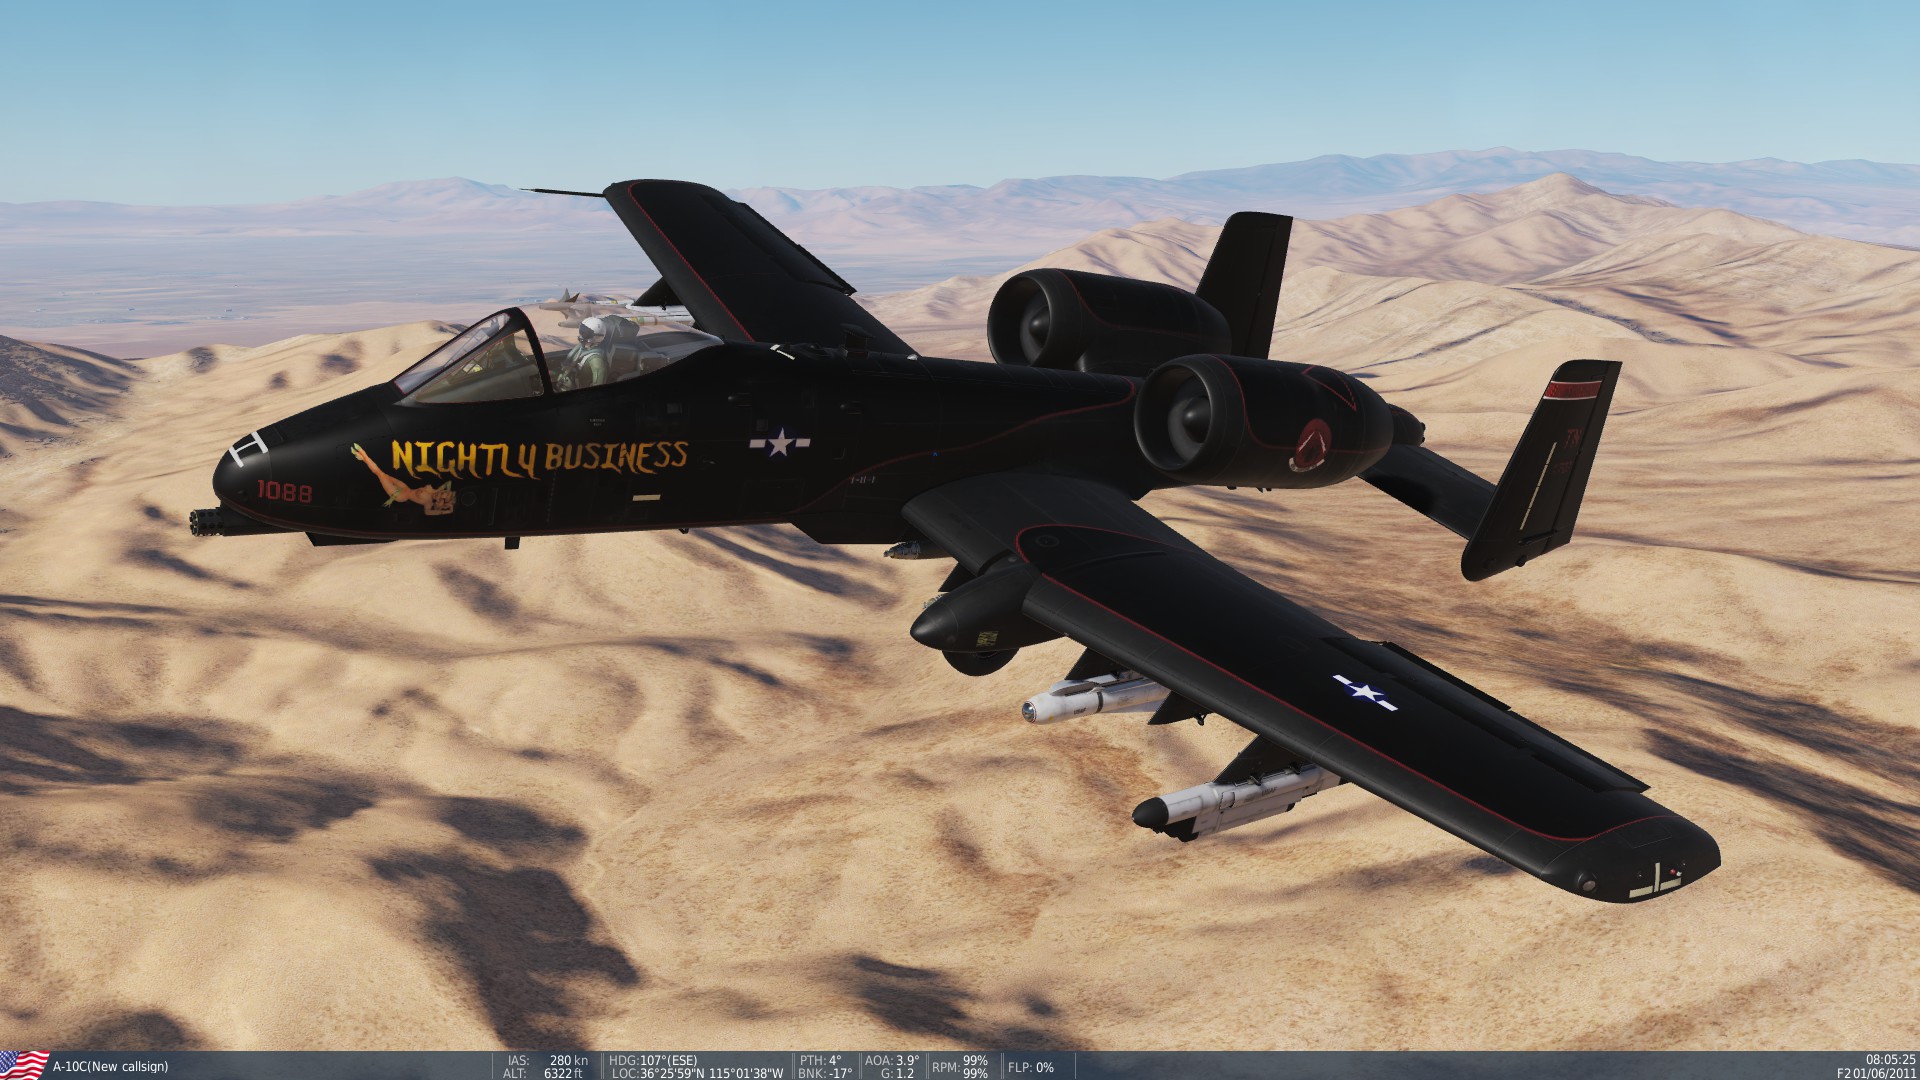 "Nightly Business" P-61 Tribute Skin for the A-10